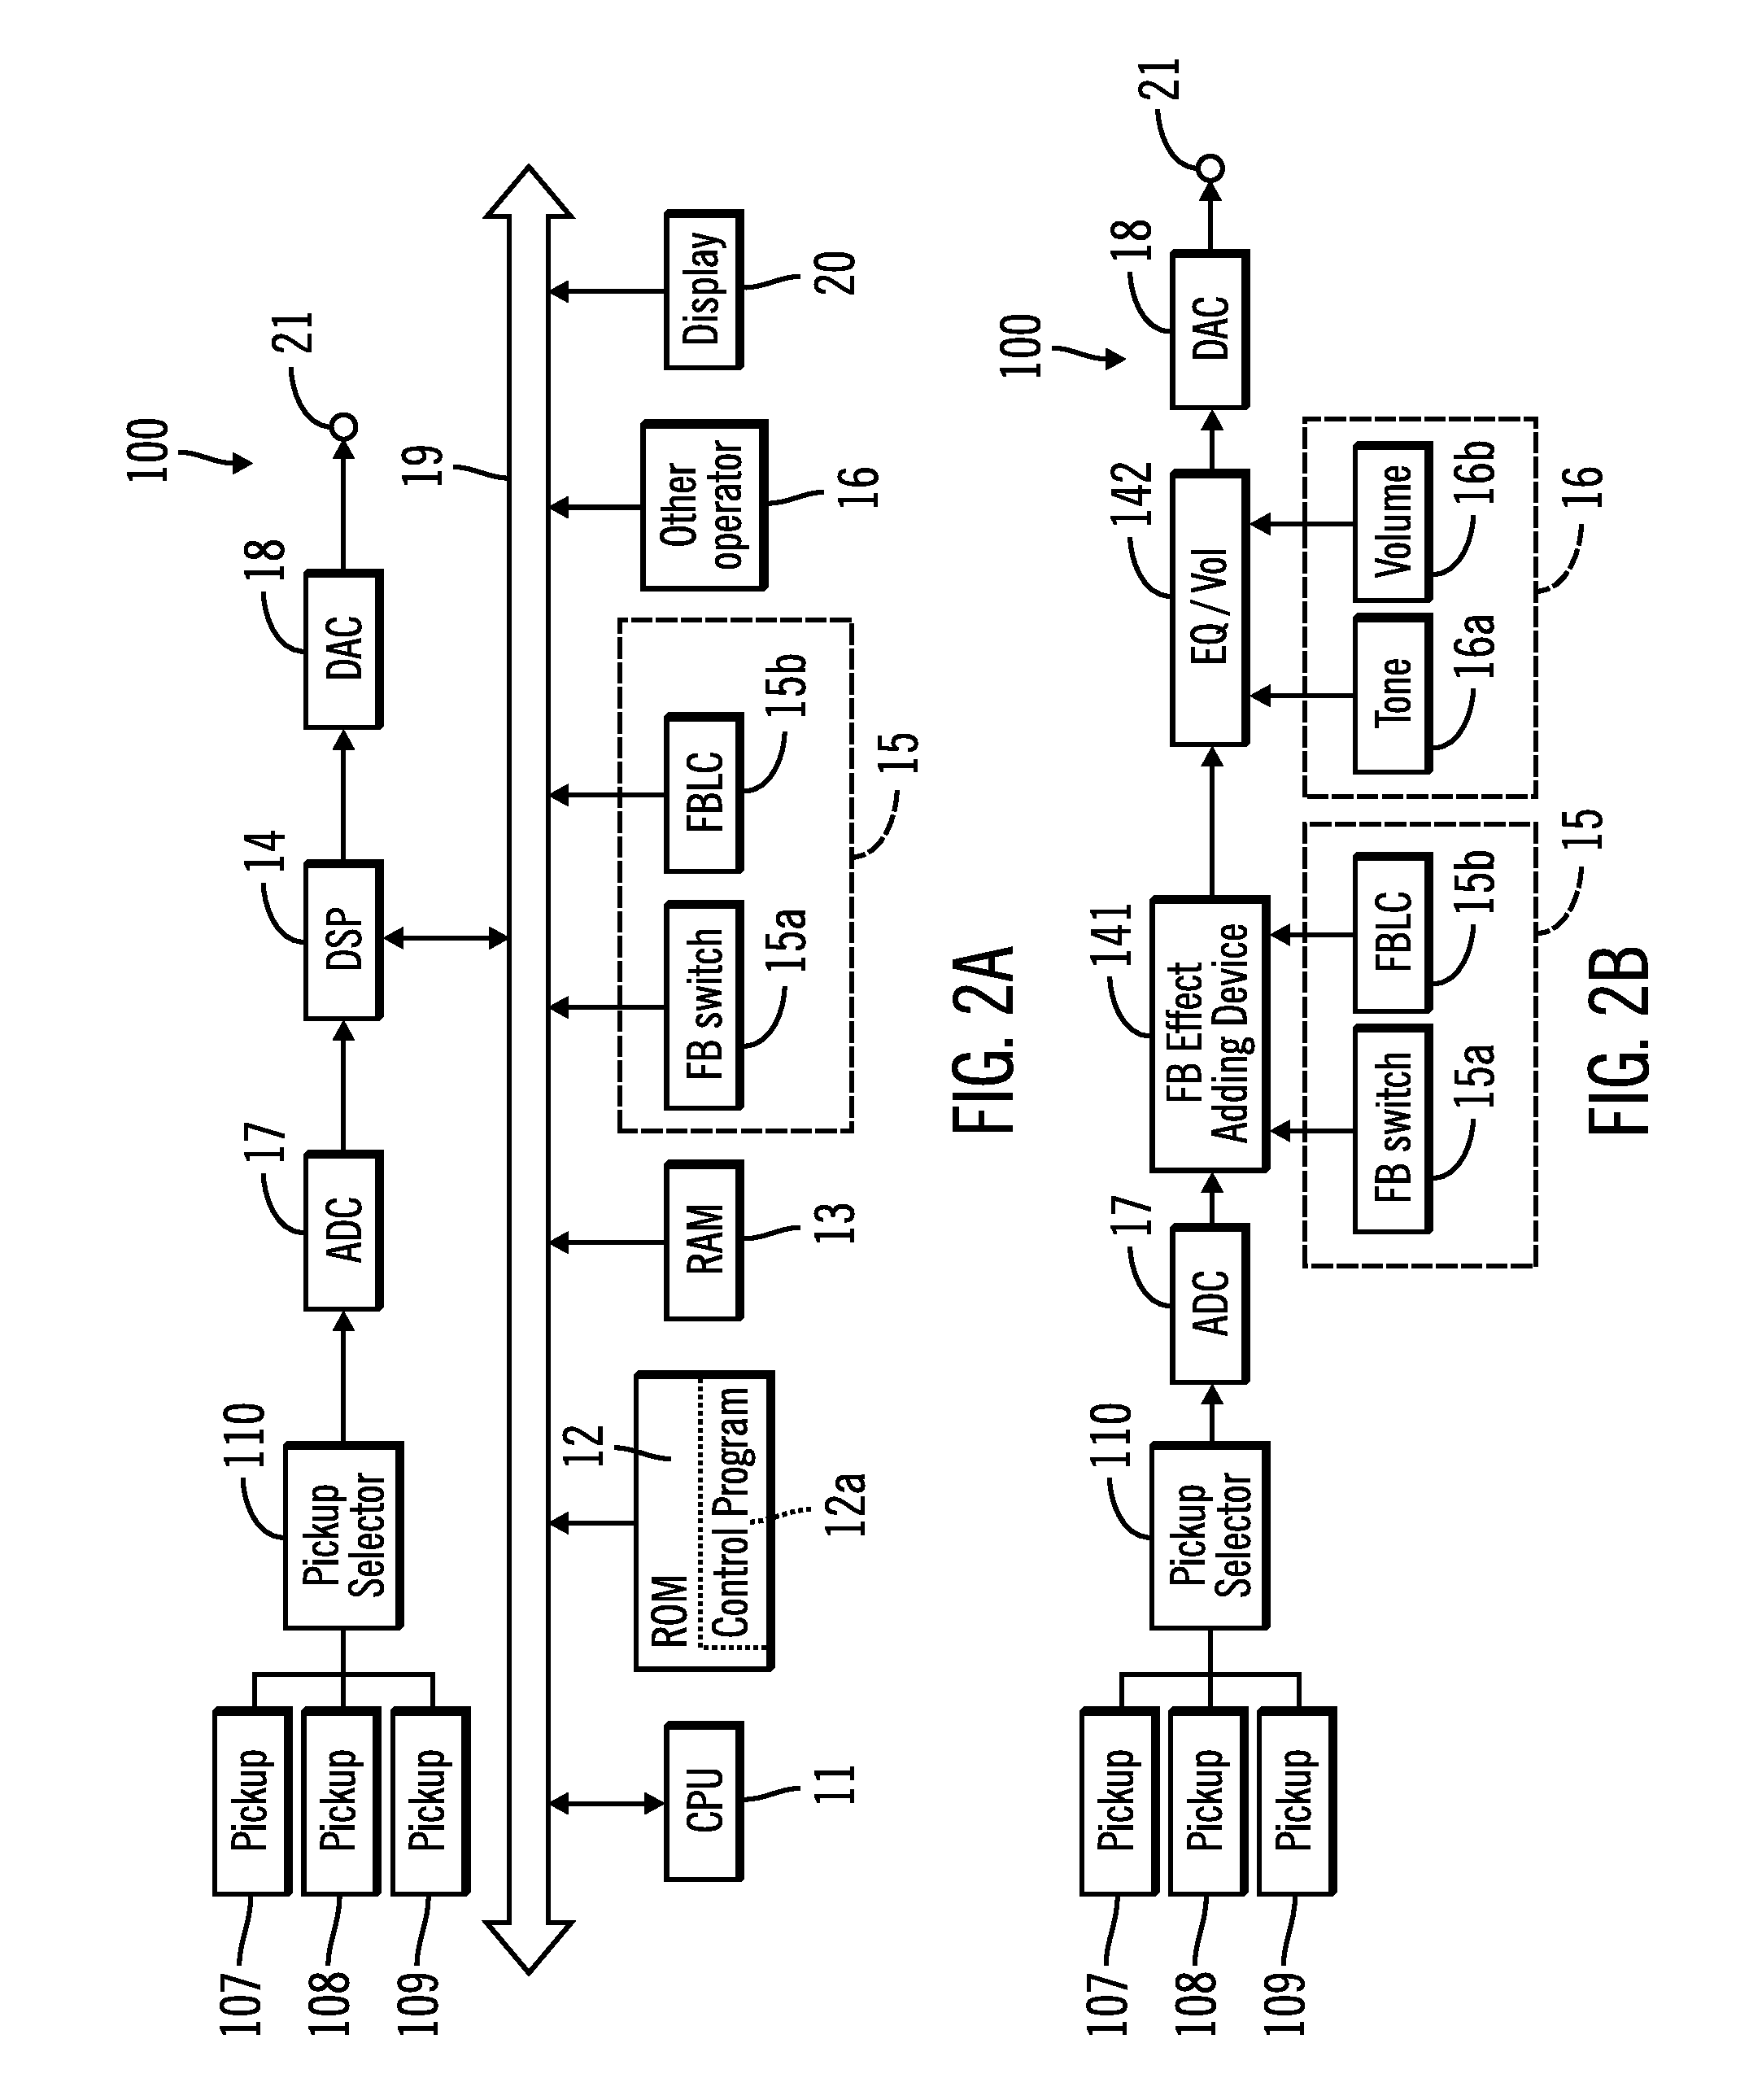 Electronic stringed instrument having effect device